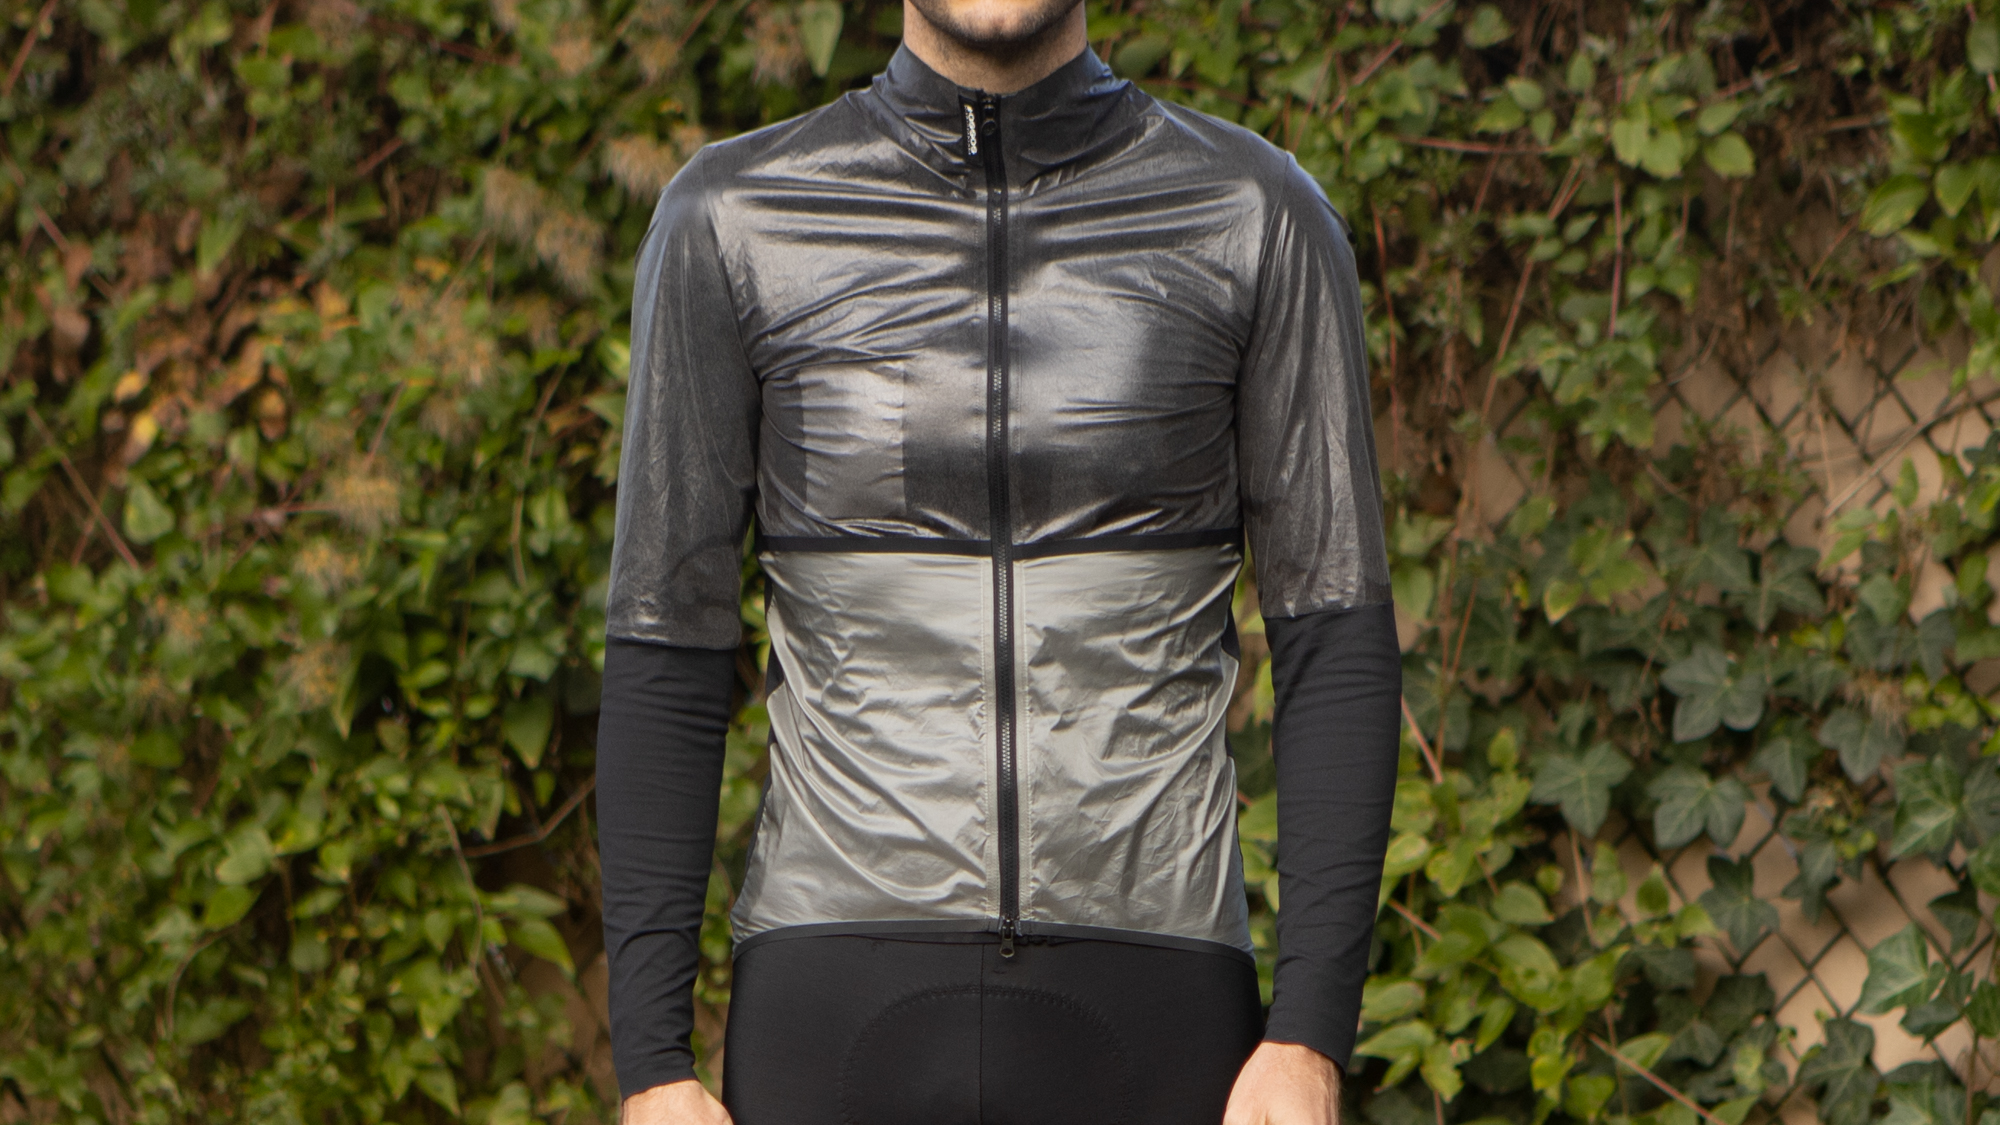 Review: Assos Equipe RS jacket